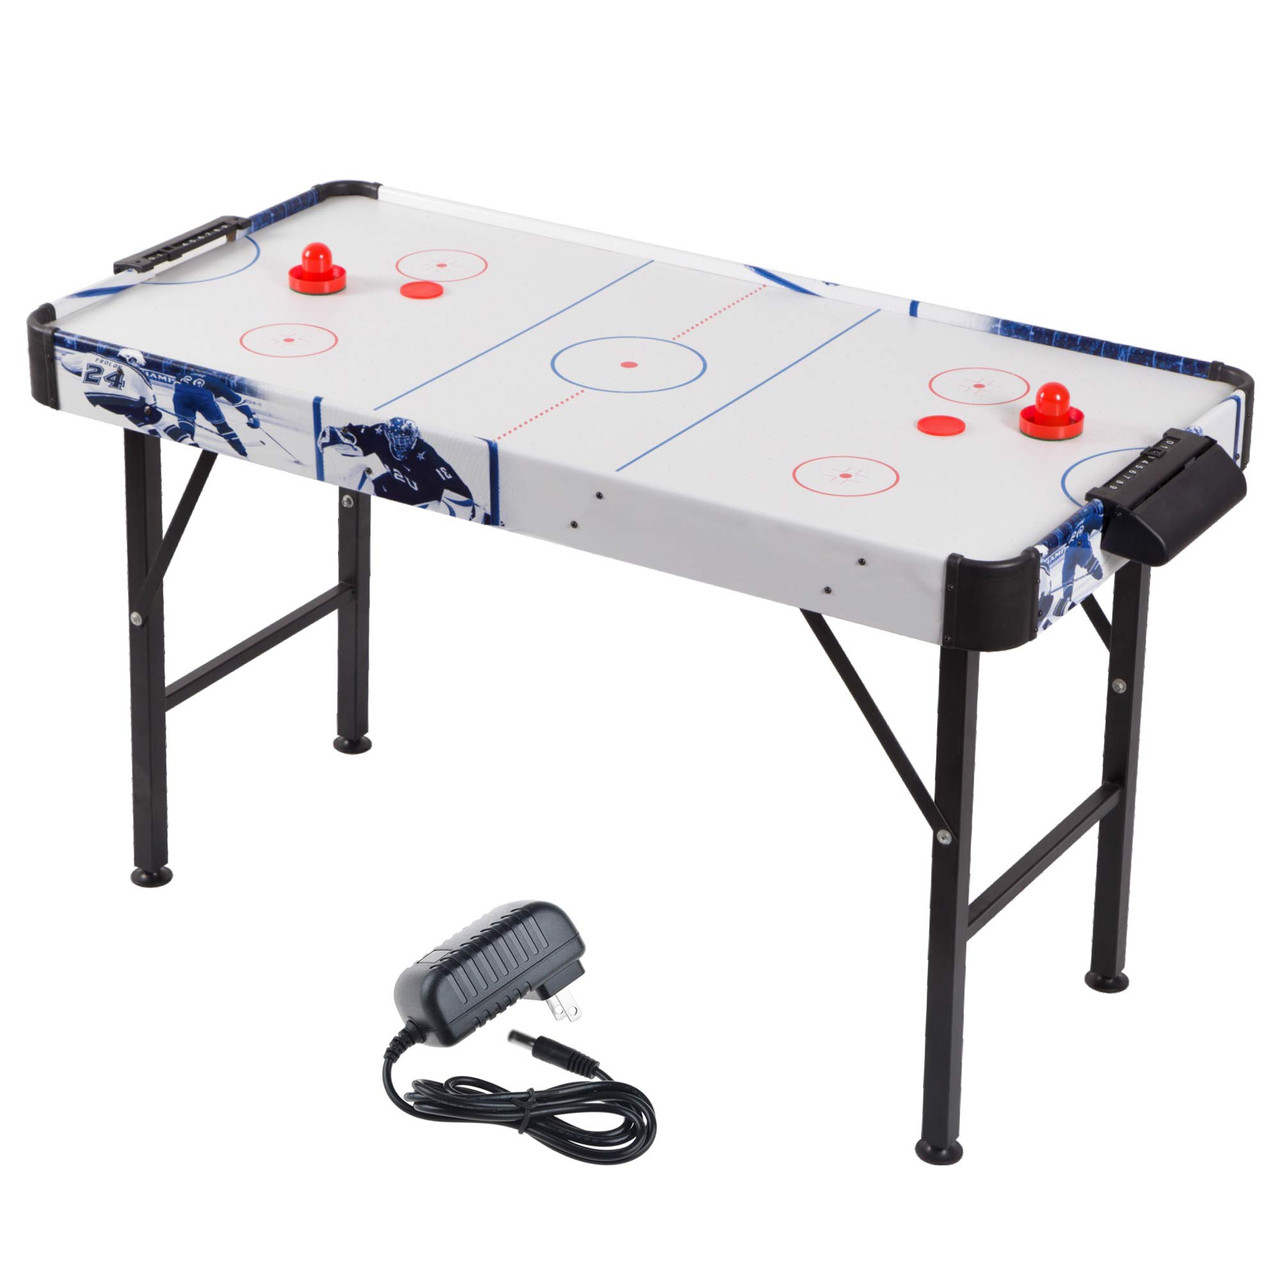 Point Games Air Hockey Table for Kids - Electric Powered Air Hockey Game -  Foldable & Tabletop - Air Hockey for Kids & Adults - Games for Girls & Boys  - Toys 4 U